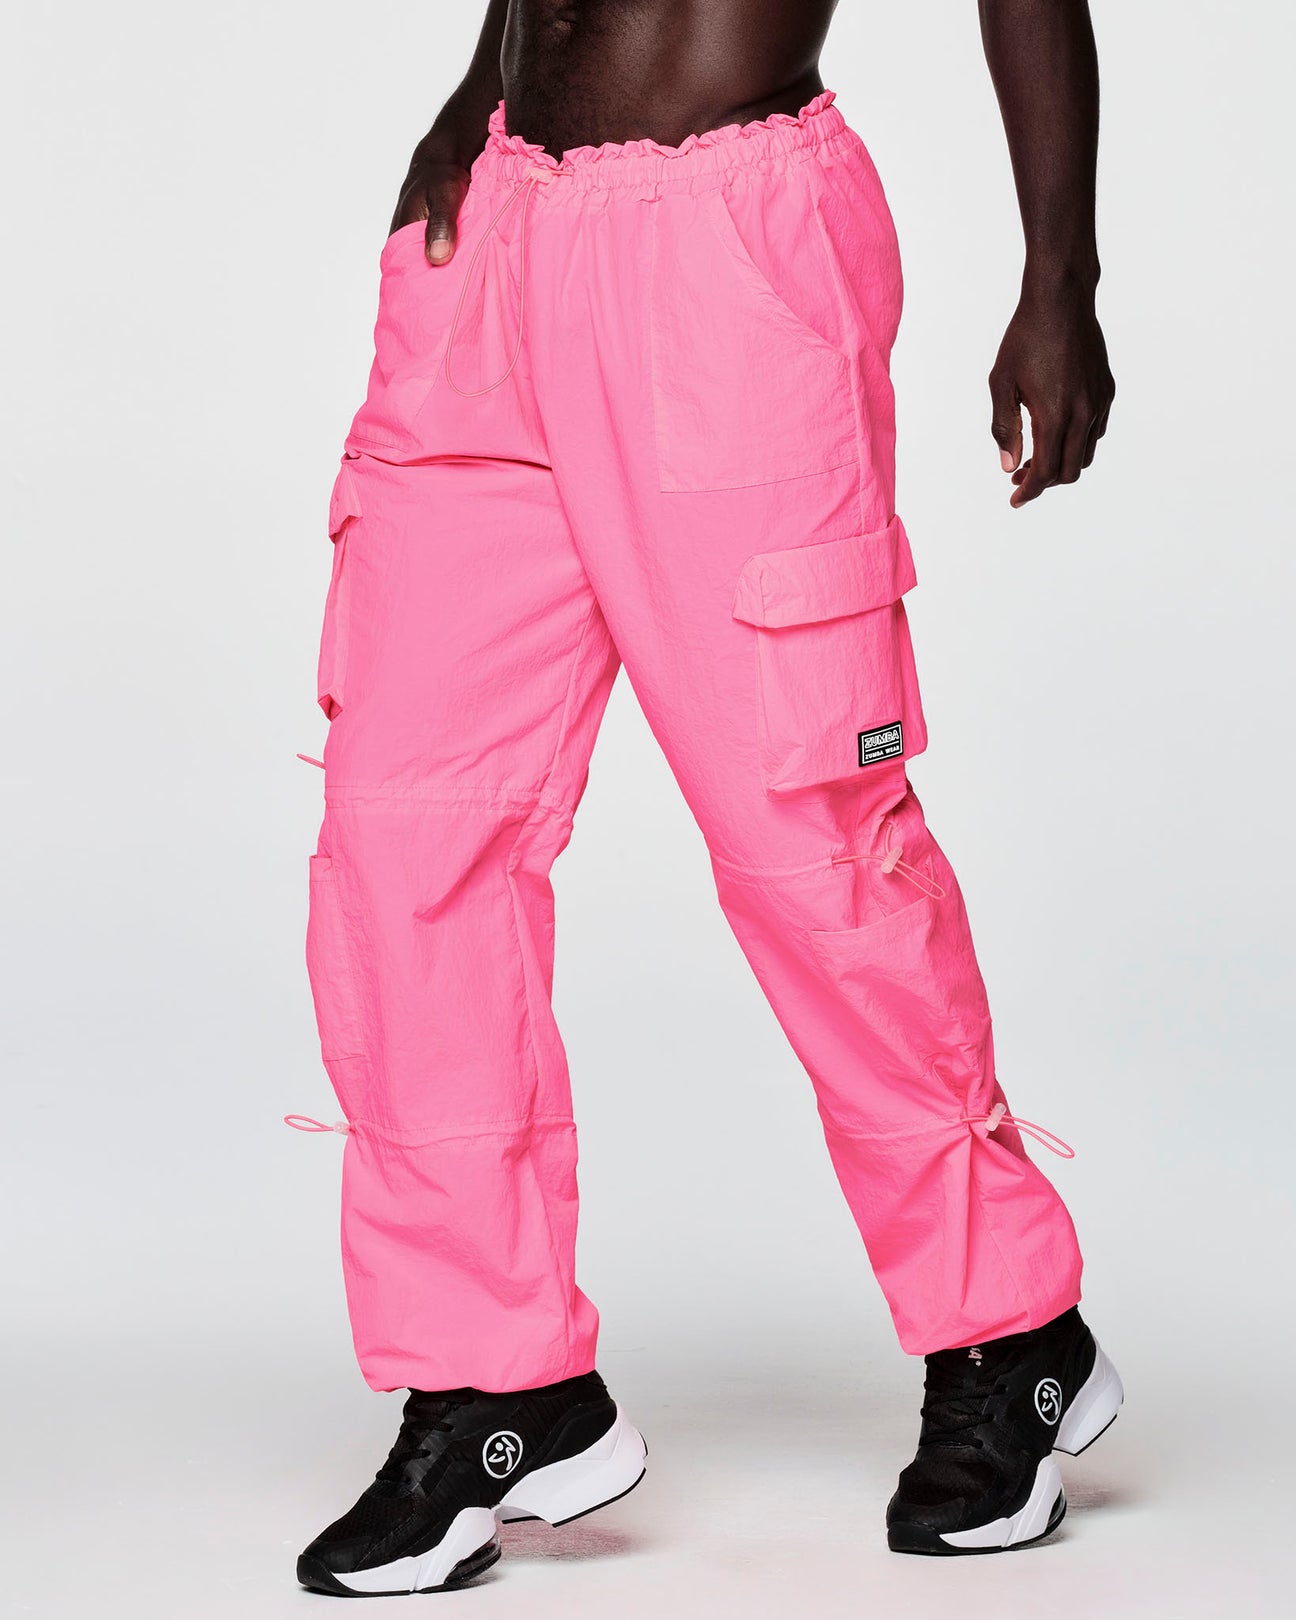 Zumba Fitness, Pants & Jumpsuits, Zumba Wear Party In Pink Cargo Pants  Xxl 2xl